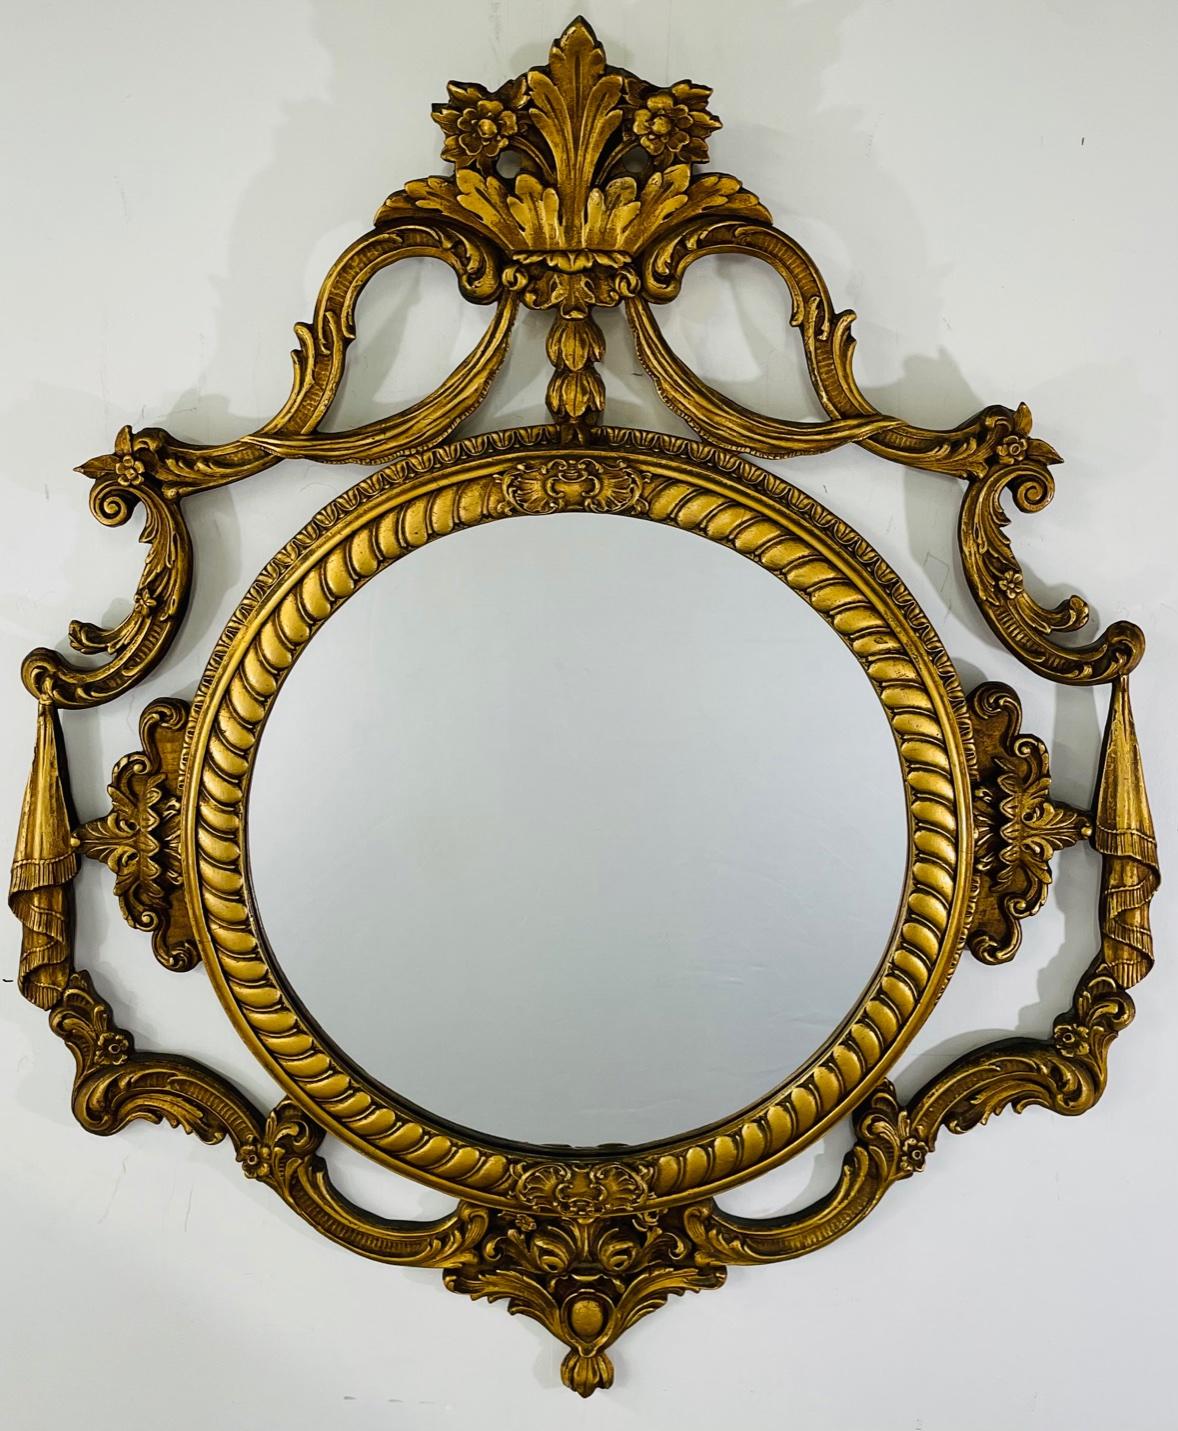 A French Louis XV Rococo style gilt wood circular wall or mantel mirror presenting exquisite wood carving details. The mirror features acanthus and scrolls design flowing around the circular mirror. The whole frame is finely gilded. Elegant and